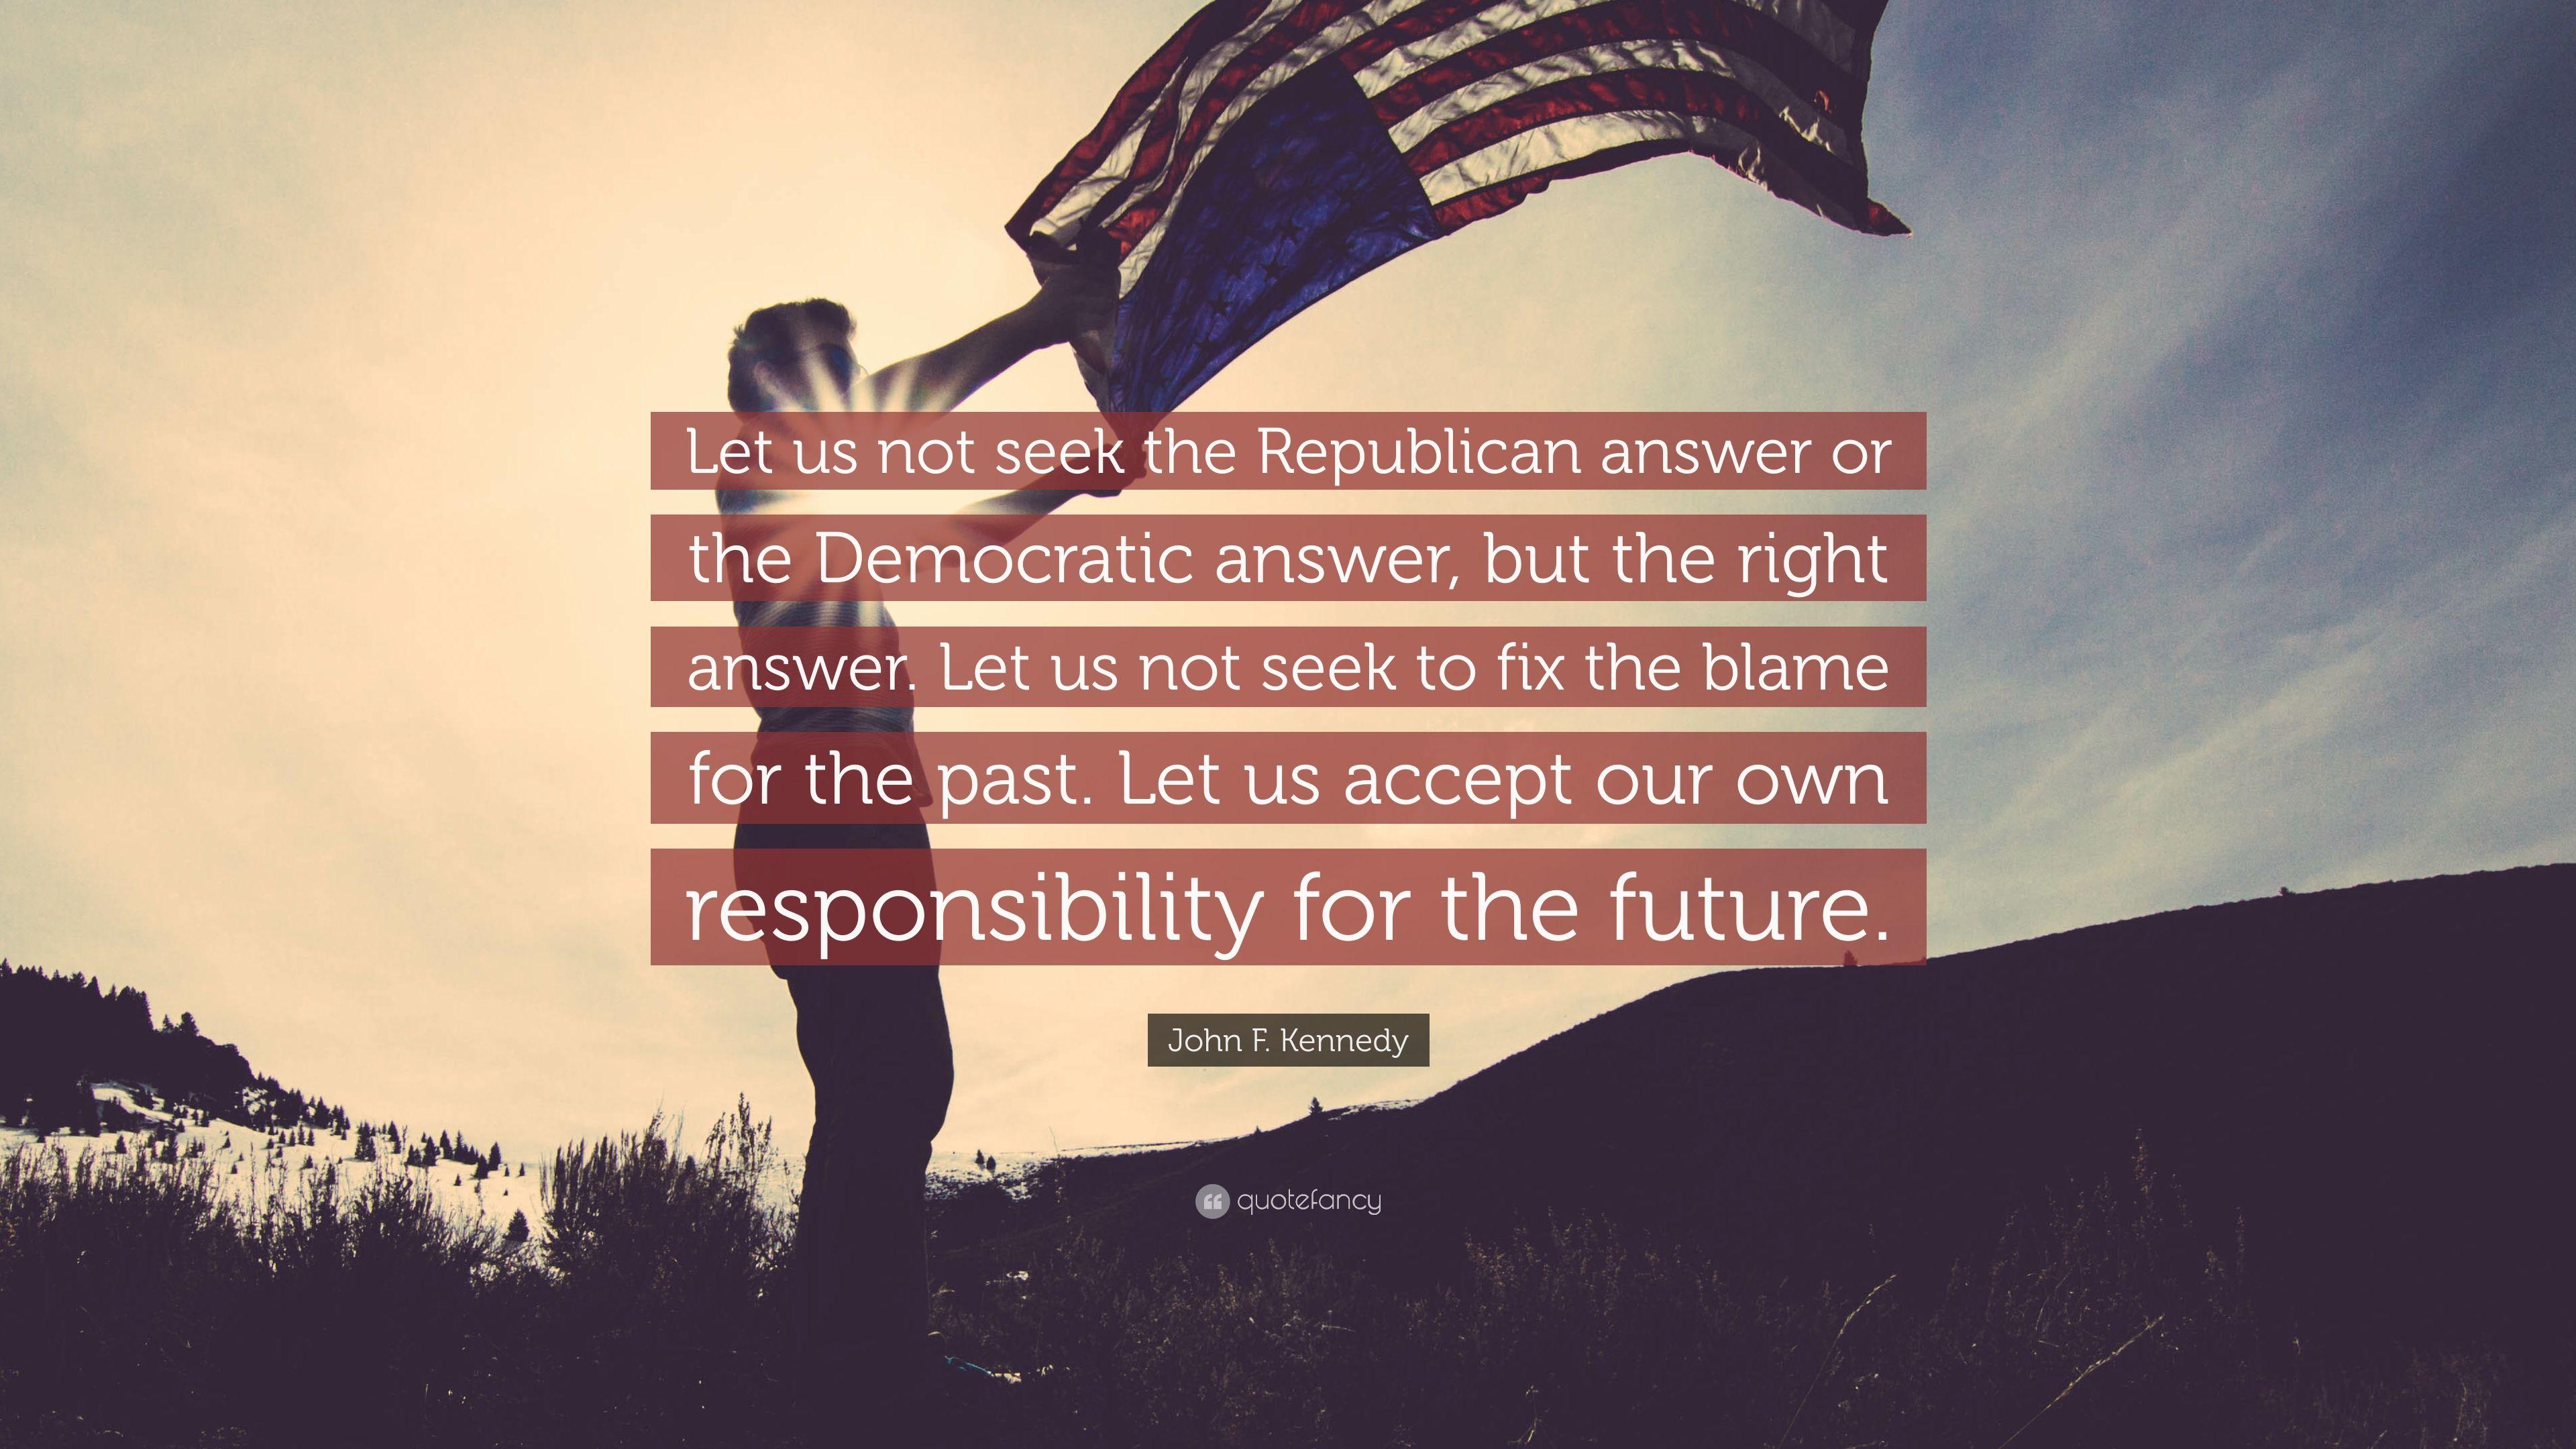 John F. Kennedy Quote: “Let us not seek the Republican answer or